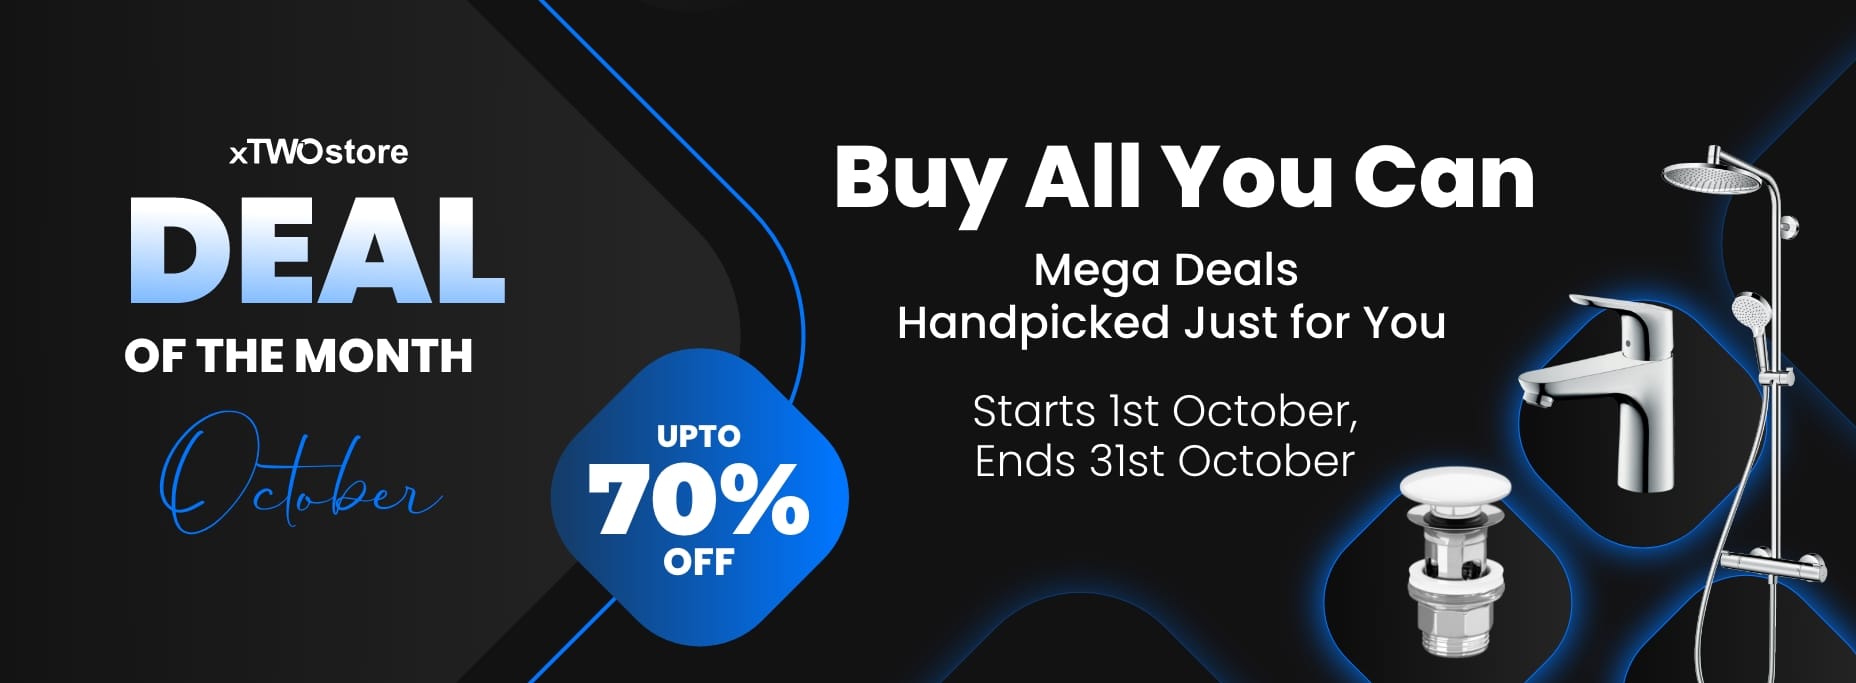 Deal Of The Month at xTWOstore